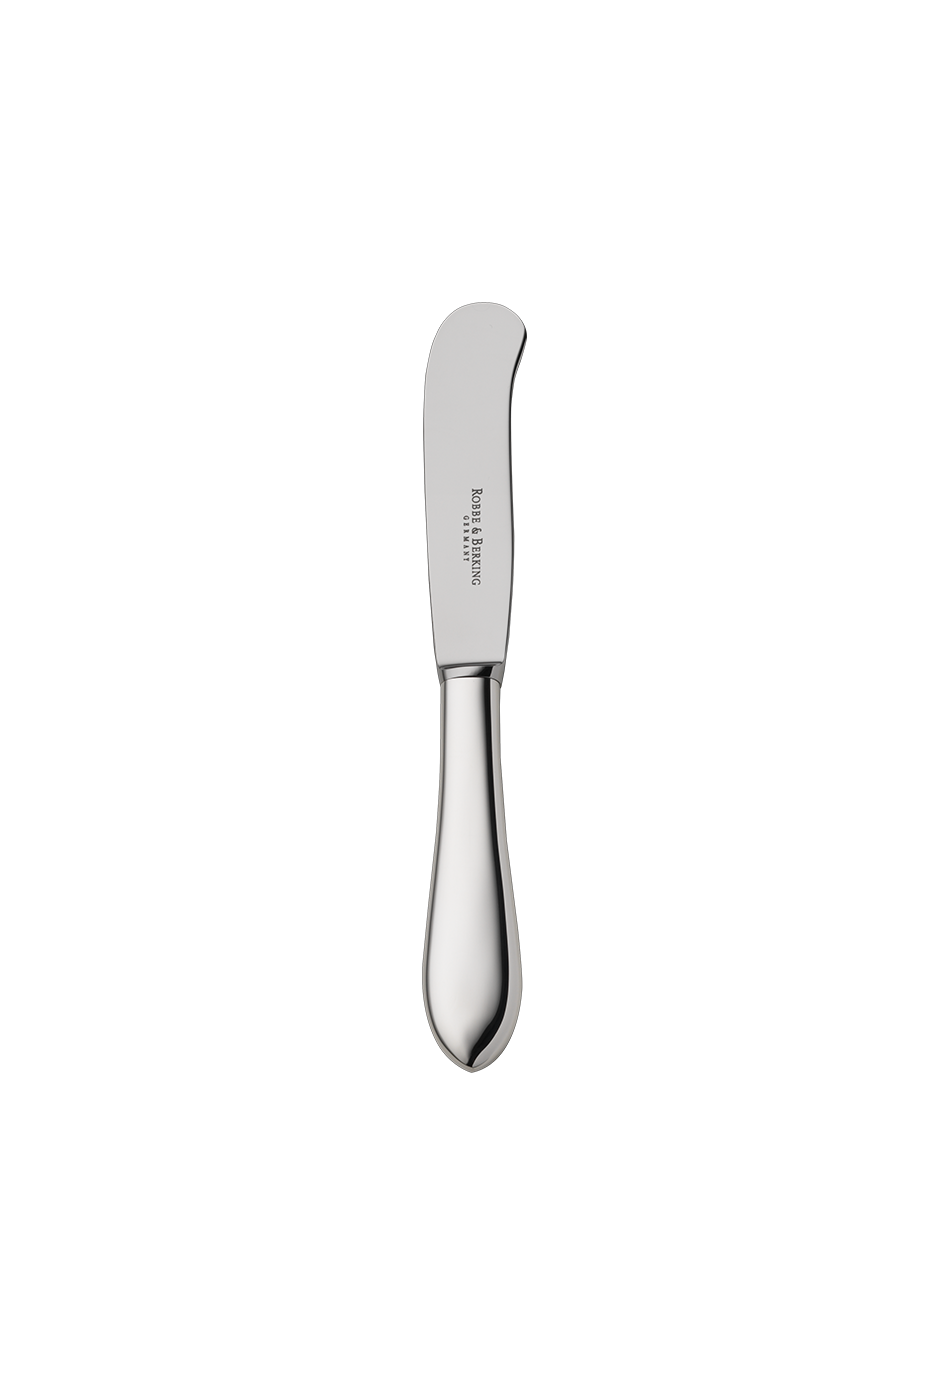 Eclipse Butter Knife (150g massive silverplated)